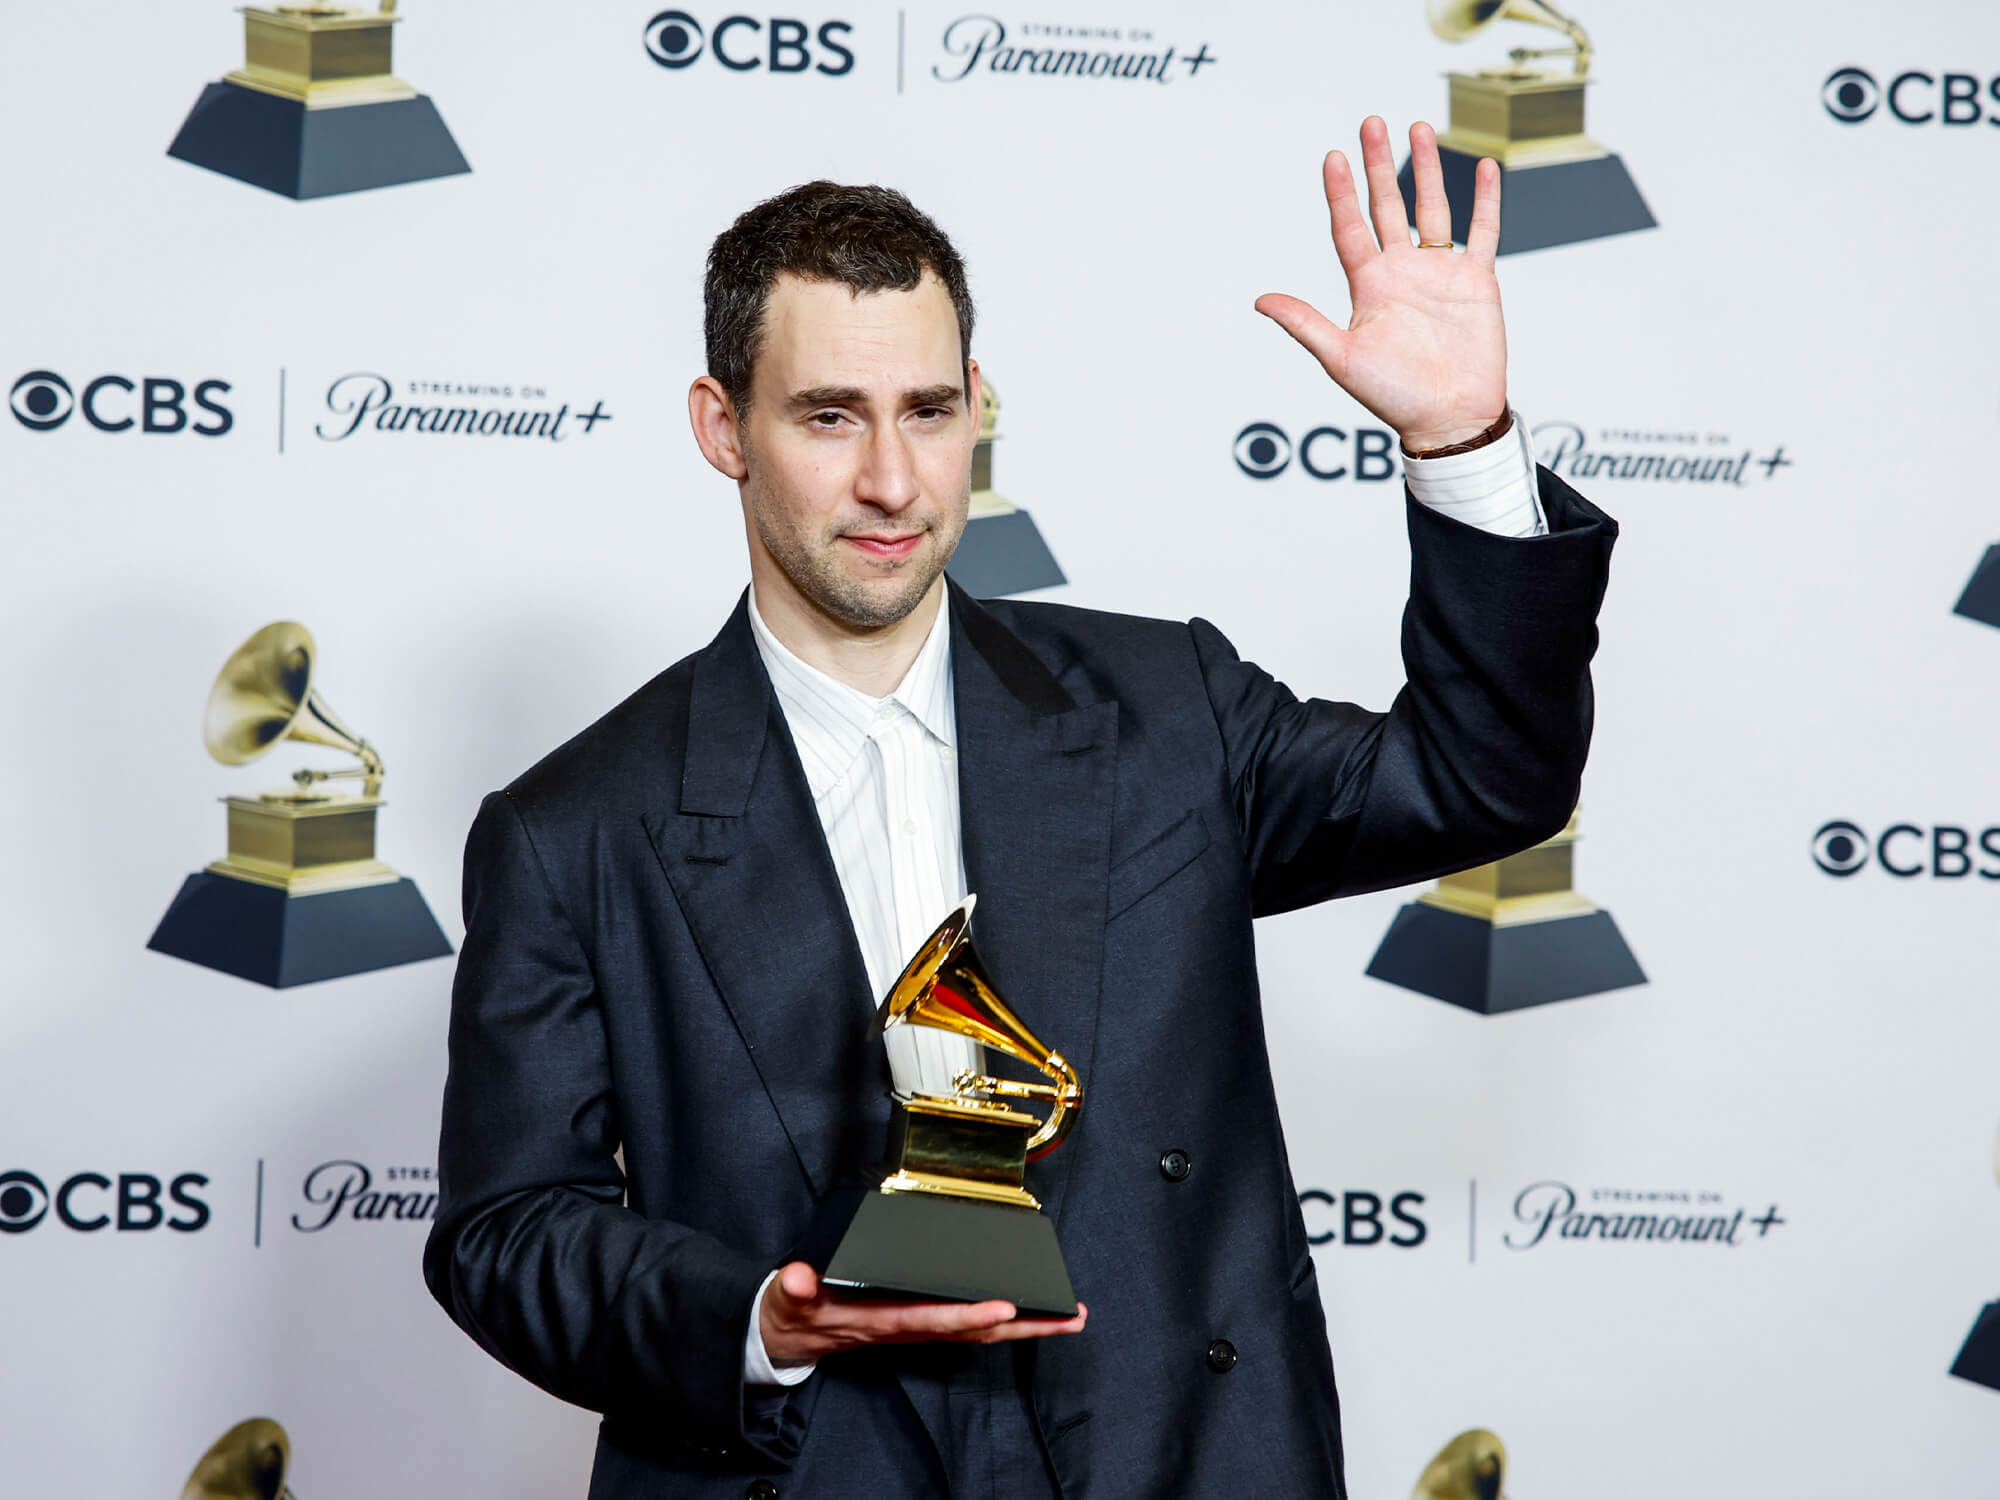 Jack Antonoff holding his Grammy award. It is a gold gramophone shape. He has one hand in the air waving.